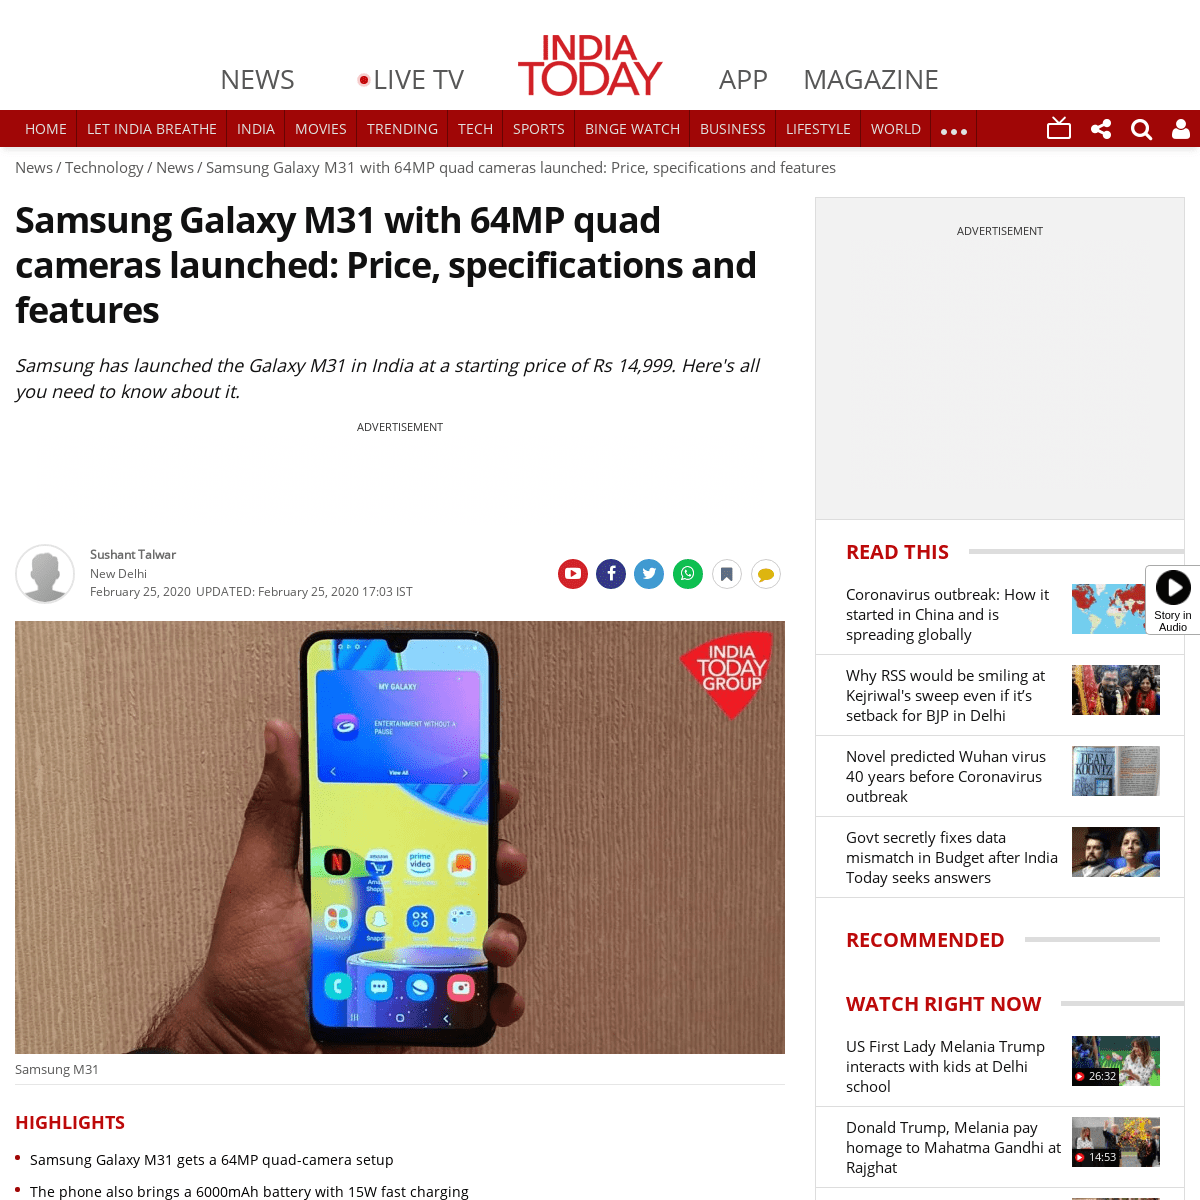 A complete backup of www.indiatoday.in/technology/news/story/samsung-galaxy-m31-with-64mp-quad-cameras-launched-price-specificat